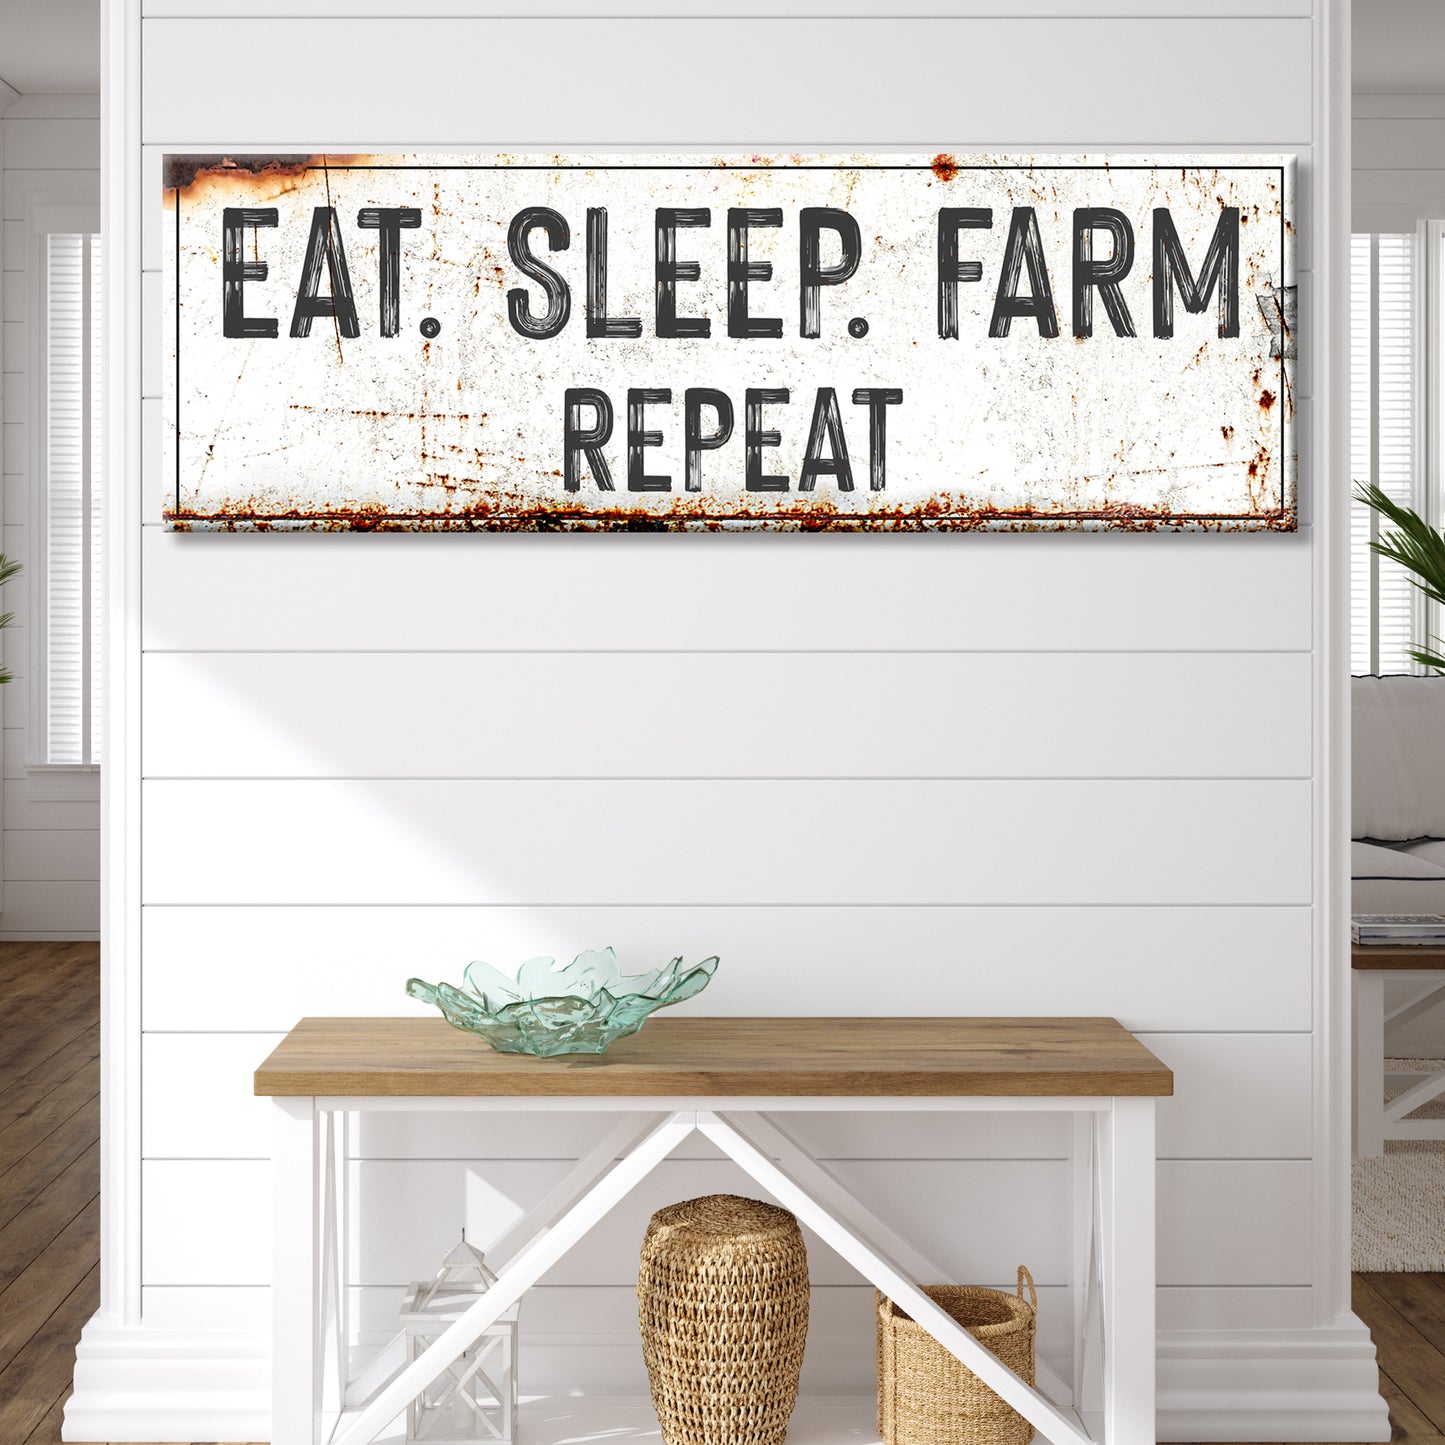 Eat Sleep Farm Repeat Sign - Image by Tailored Canvases